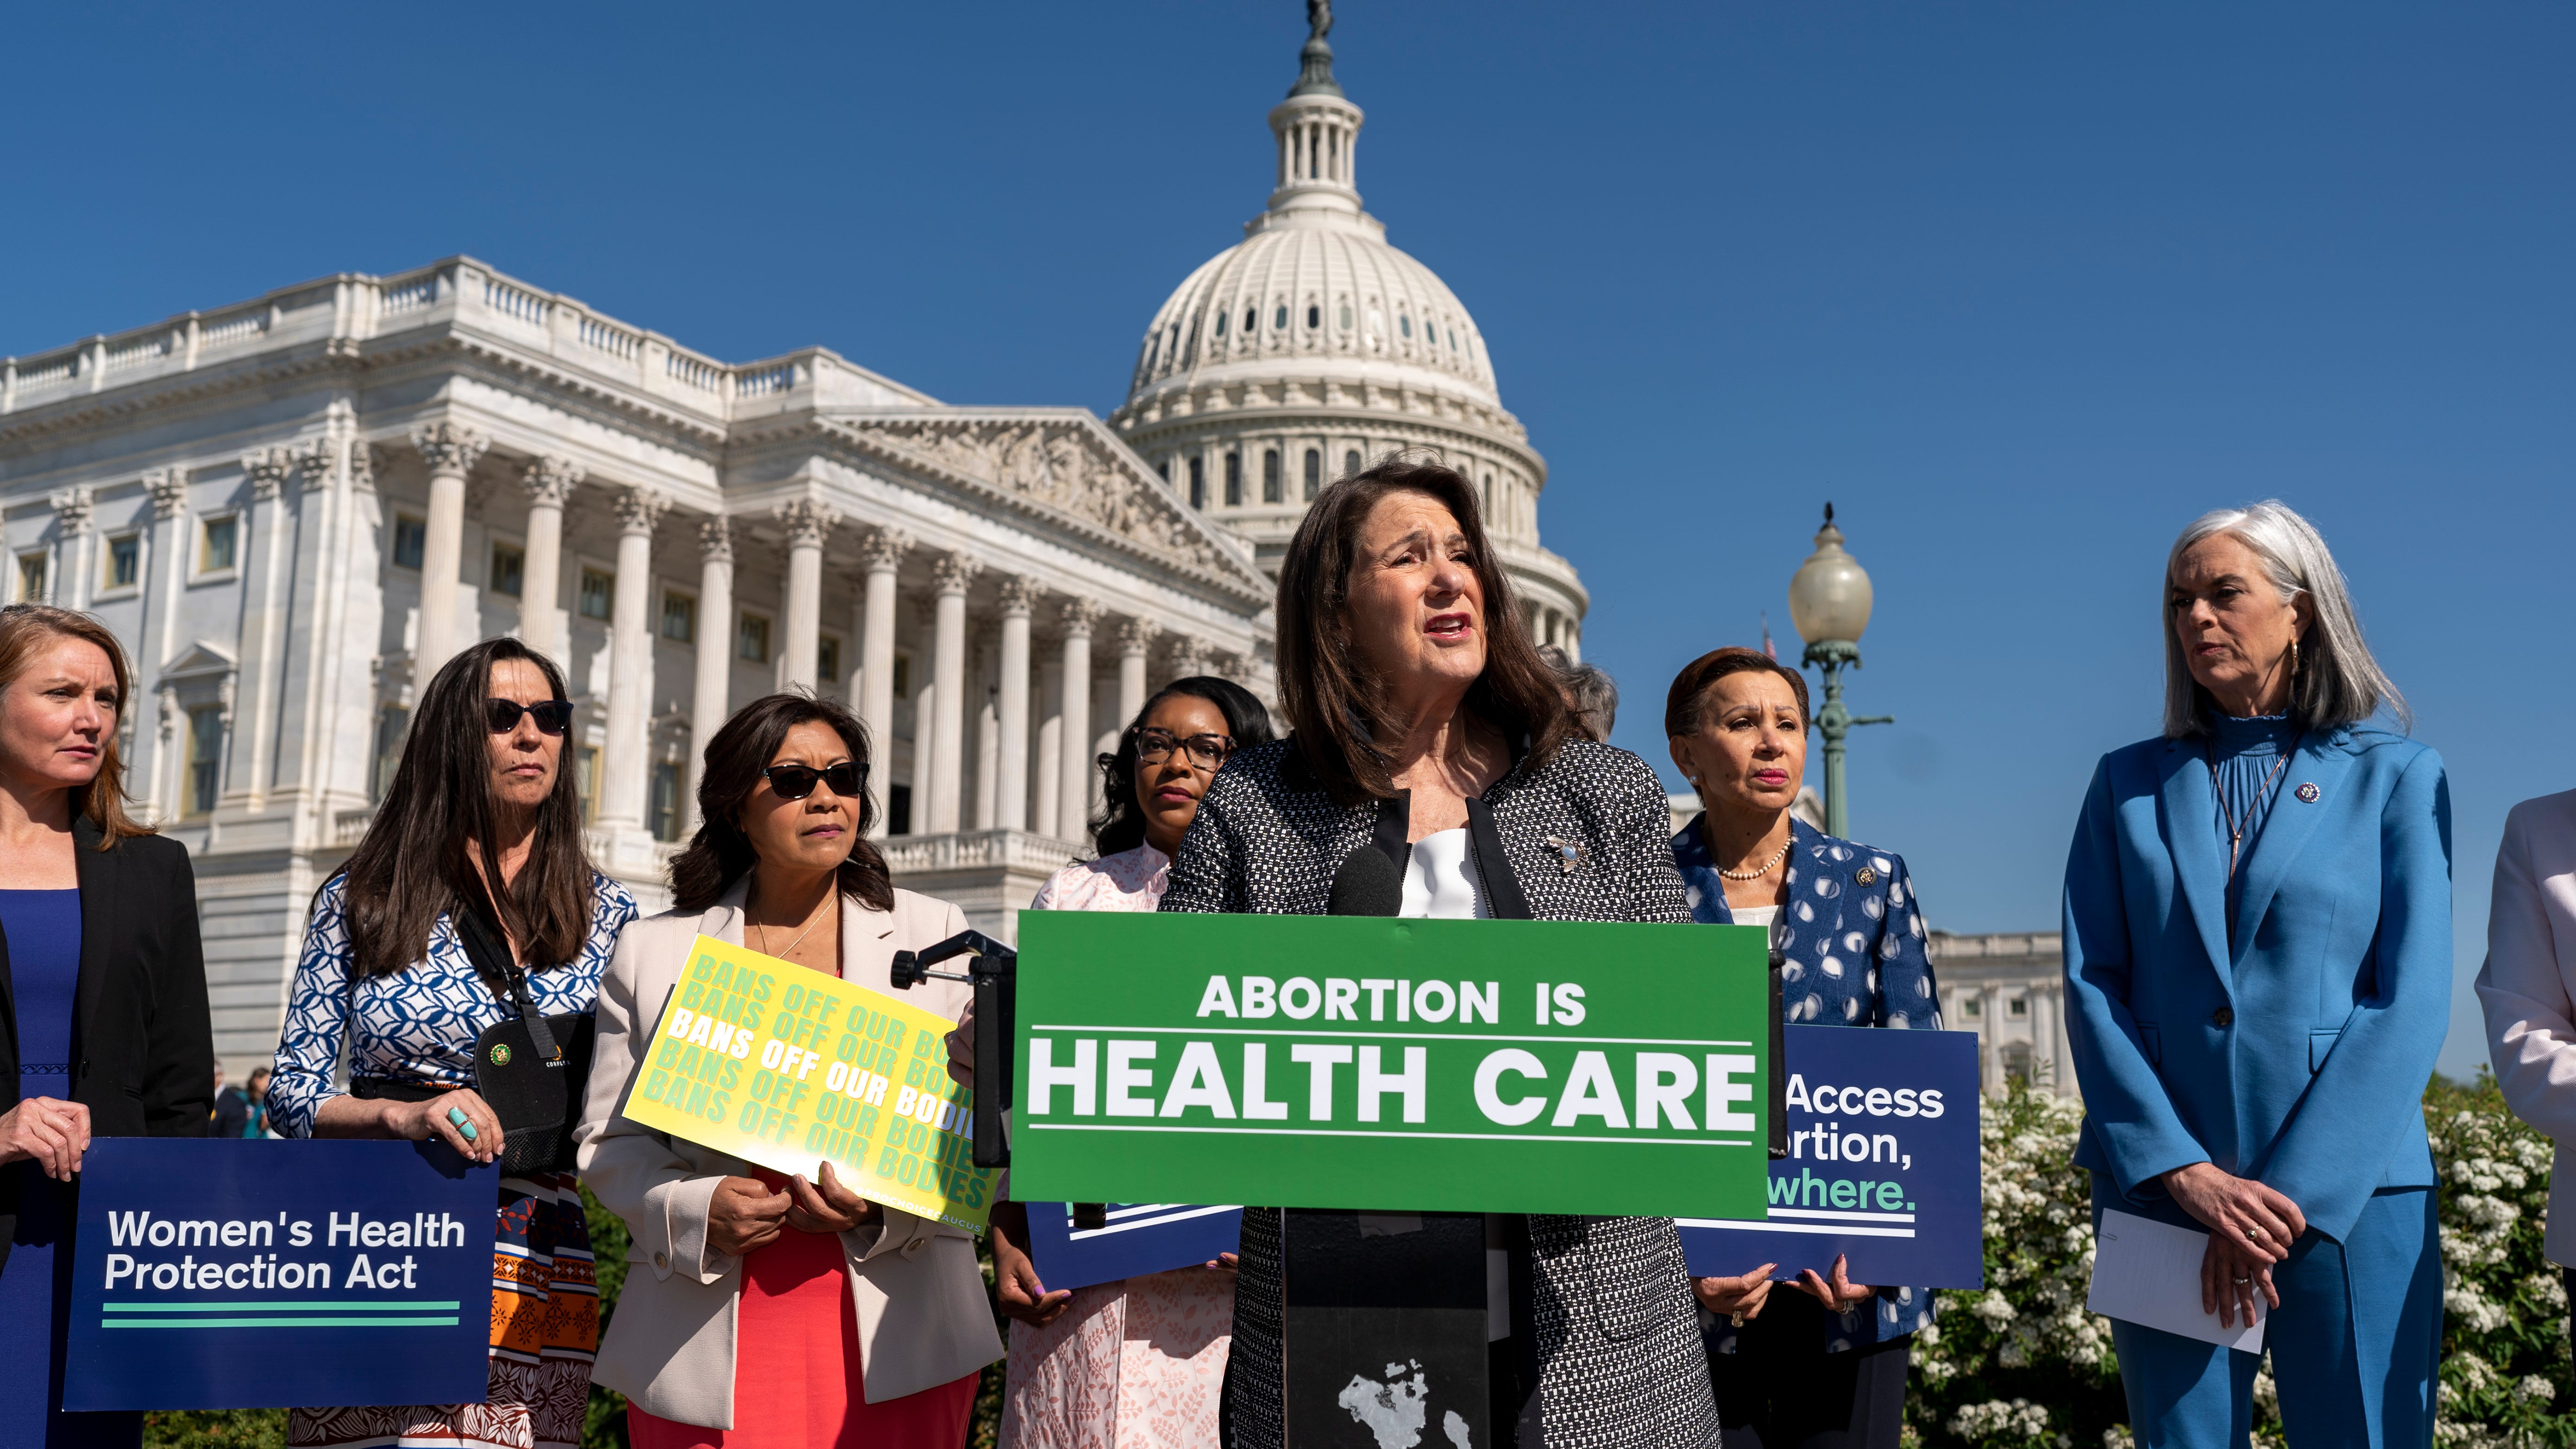 Rep. Diana DeGette, D-Colo., center, chair of the House Pro-Choice Caucus, is joined by House Minority Whip Katherine Clark, D-Mass., far right, and members of the Democratic Women's Caucus at an event calling for access to abortion medication, at the Capitol in Washington, Wednesday, April 19, 2023.